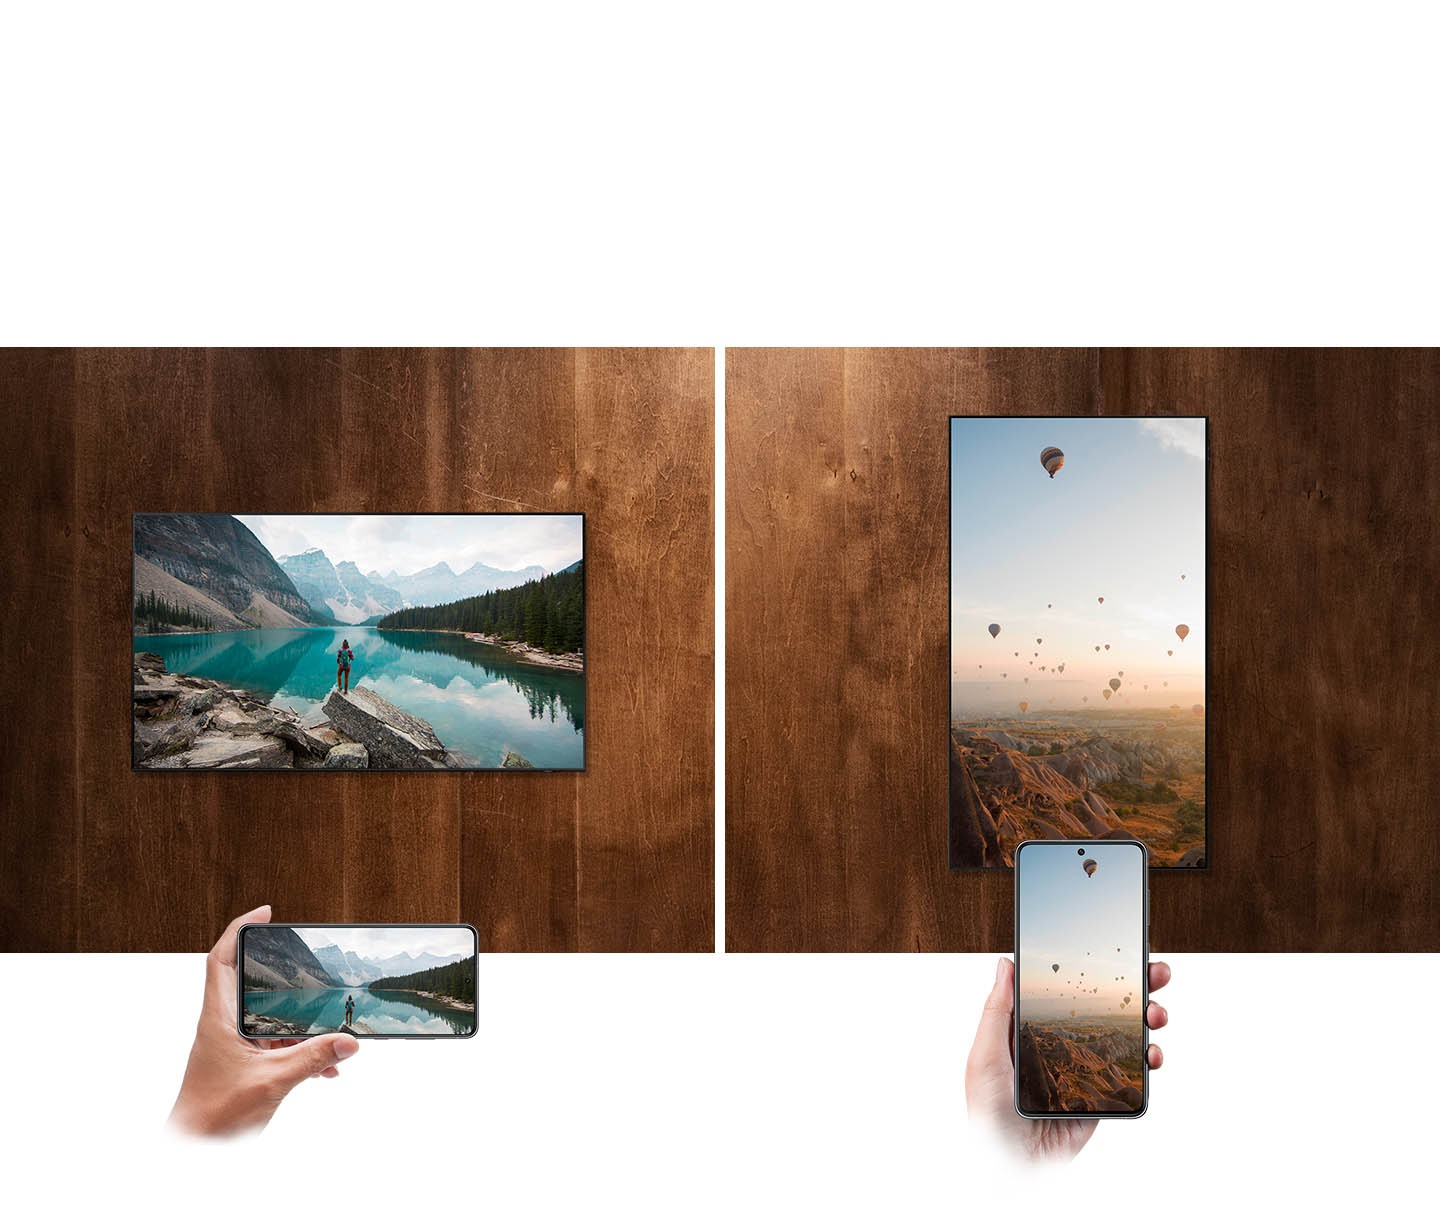 Phone images in landscape and portrait mode are mirrored on TV mounted on an Auto Rotating Wall Mount in the same direction.